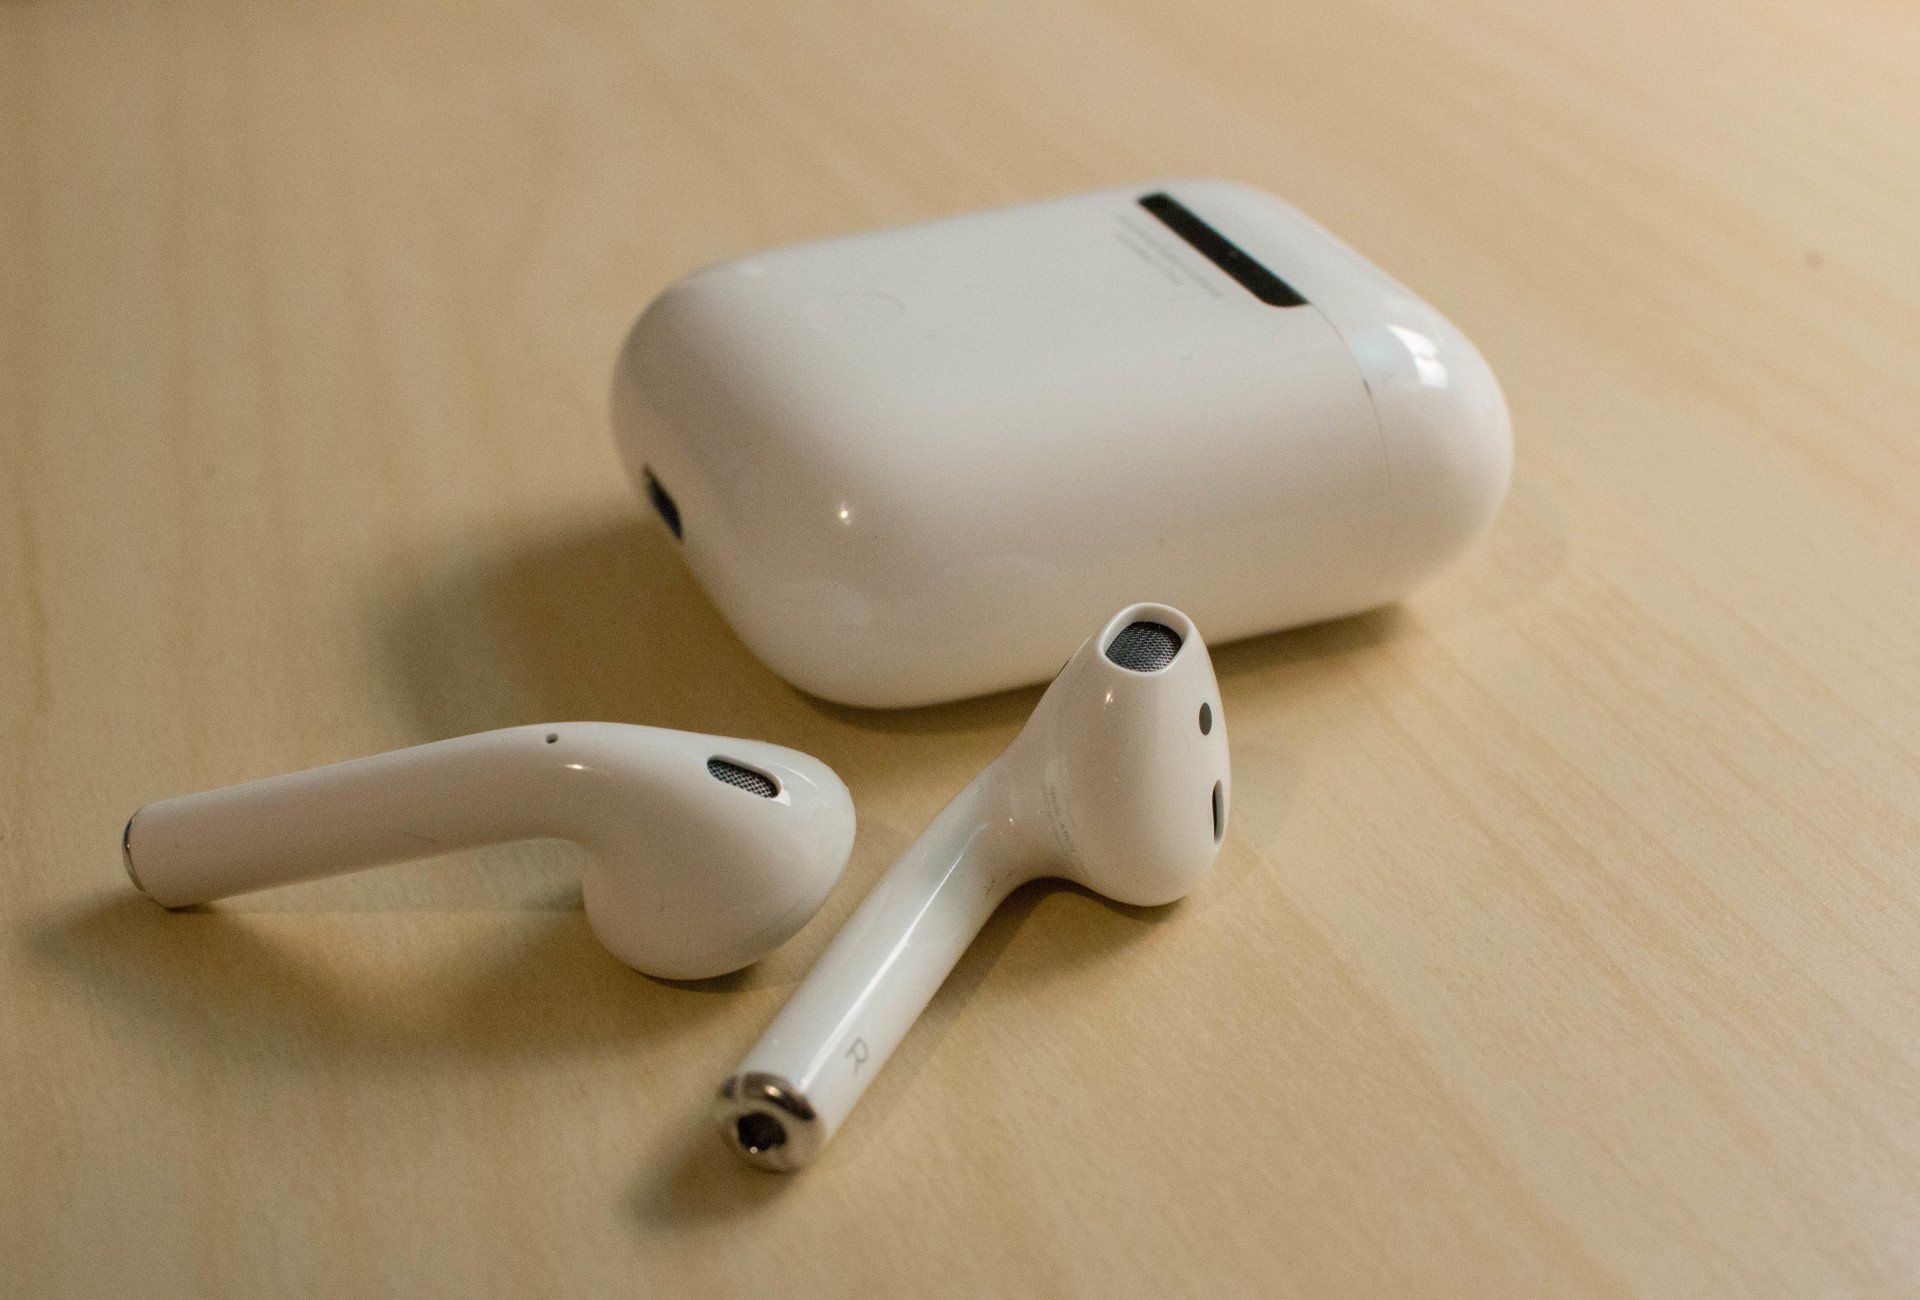 An iPhone resting next to AirPods